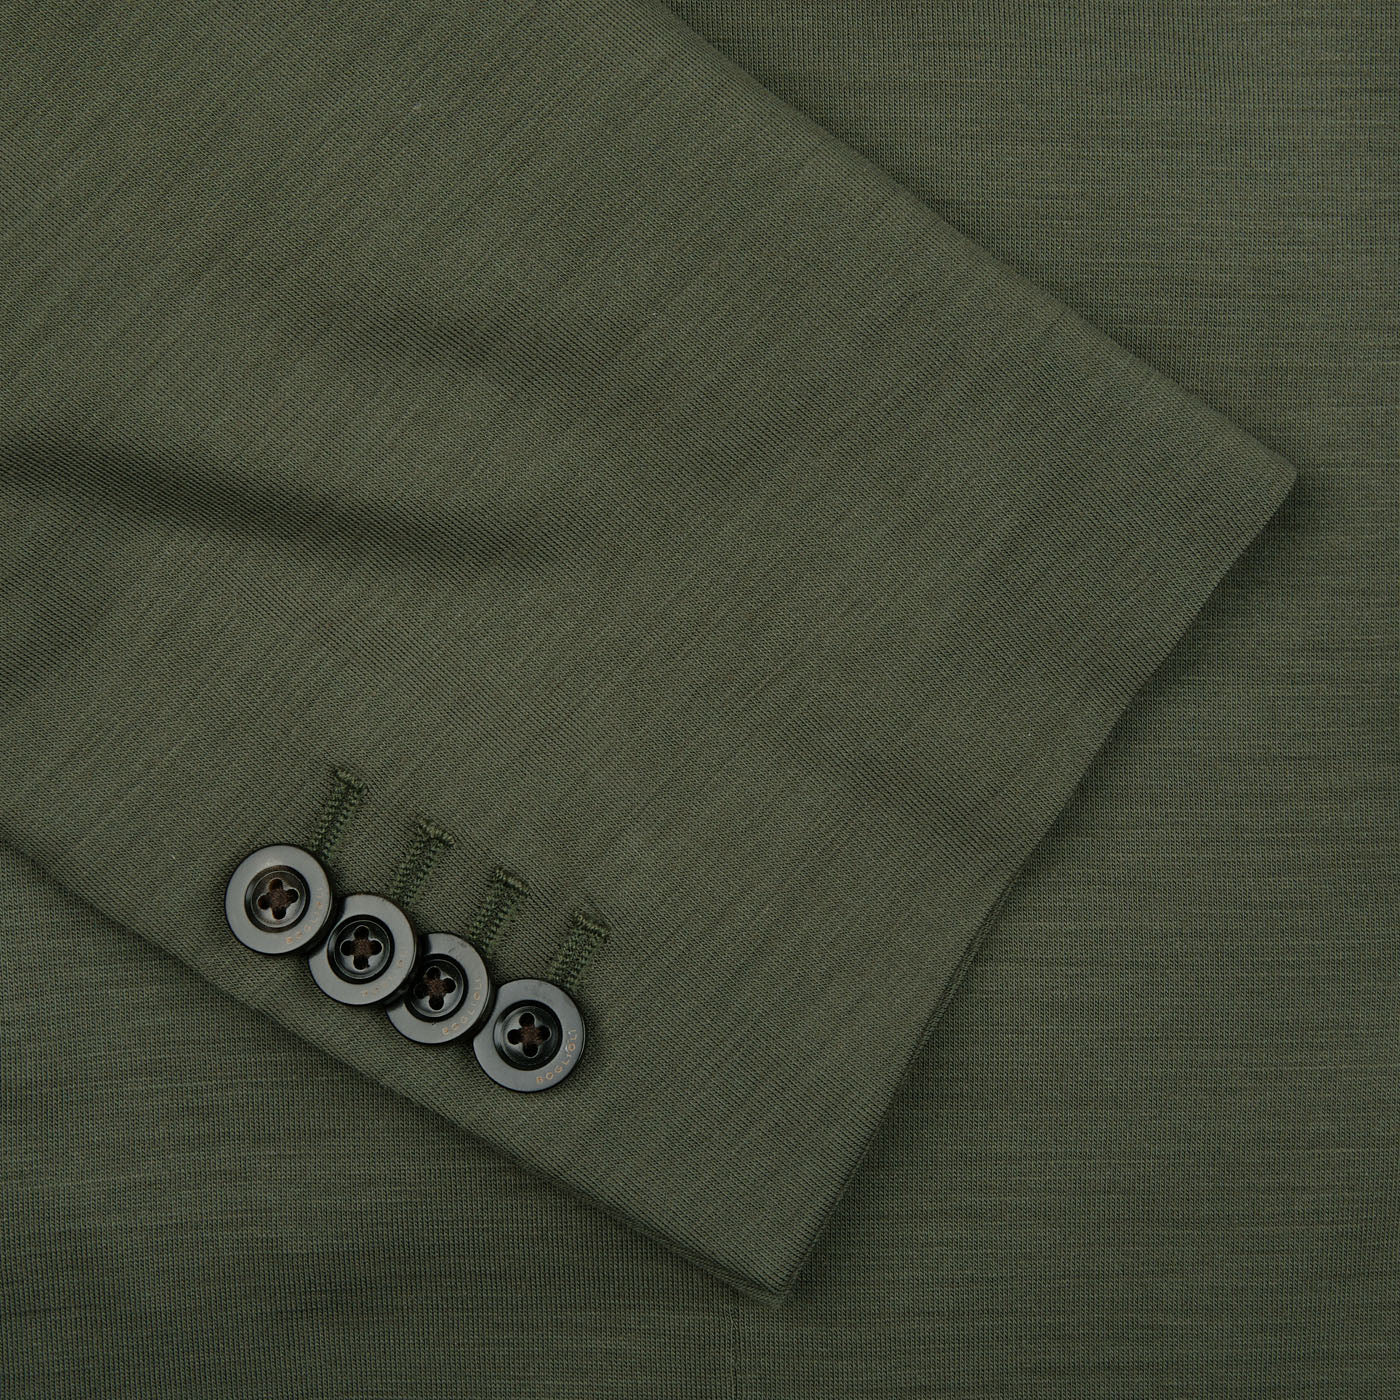 A close up of a Boglioli Dark Green Wool Jersey K Jacket with buttons, showcasing its regular fit and unstructured craftsmanship.